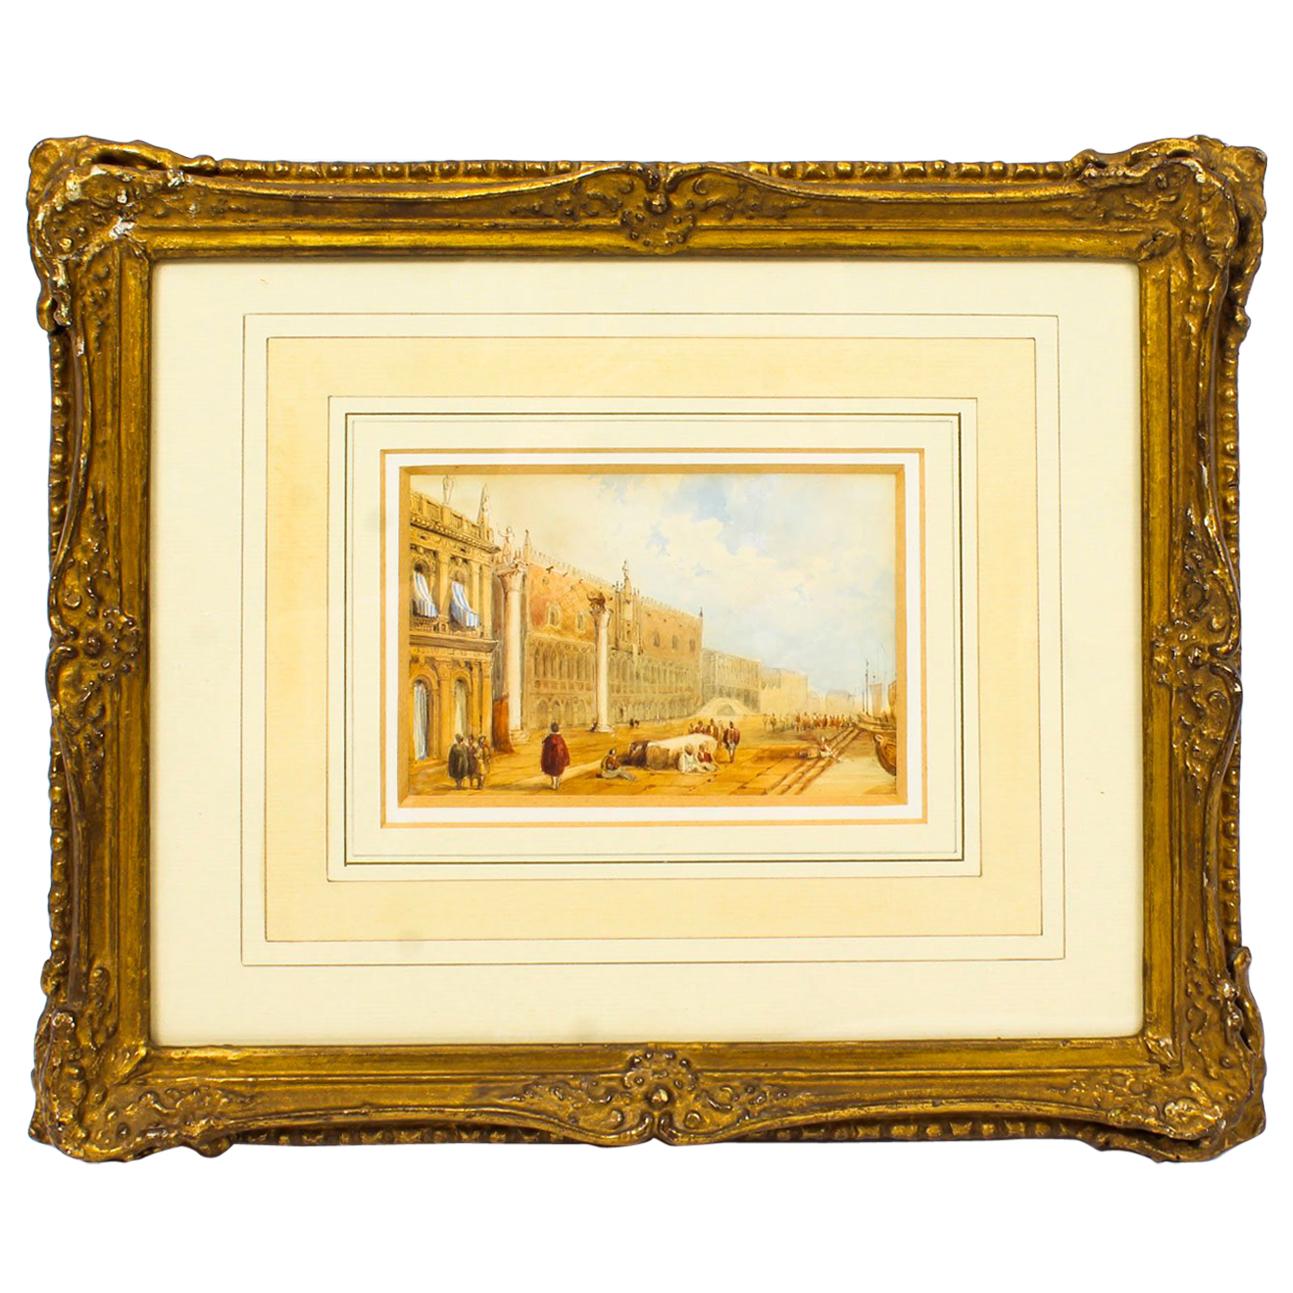 Antique Watercolor Venice by Samuel Prout, Early 19th Century